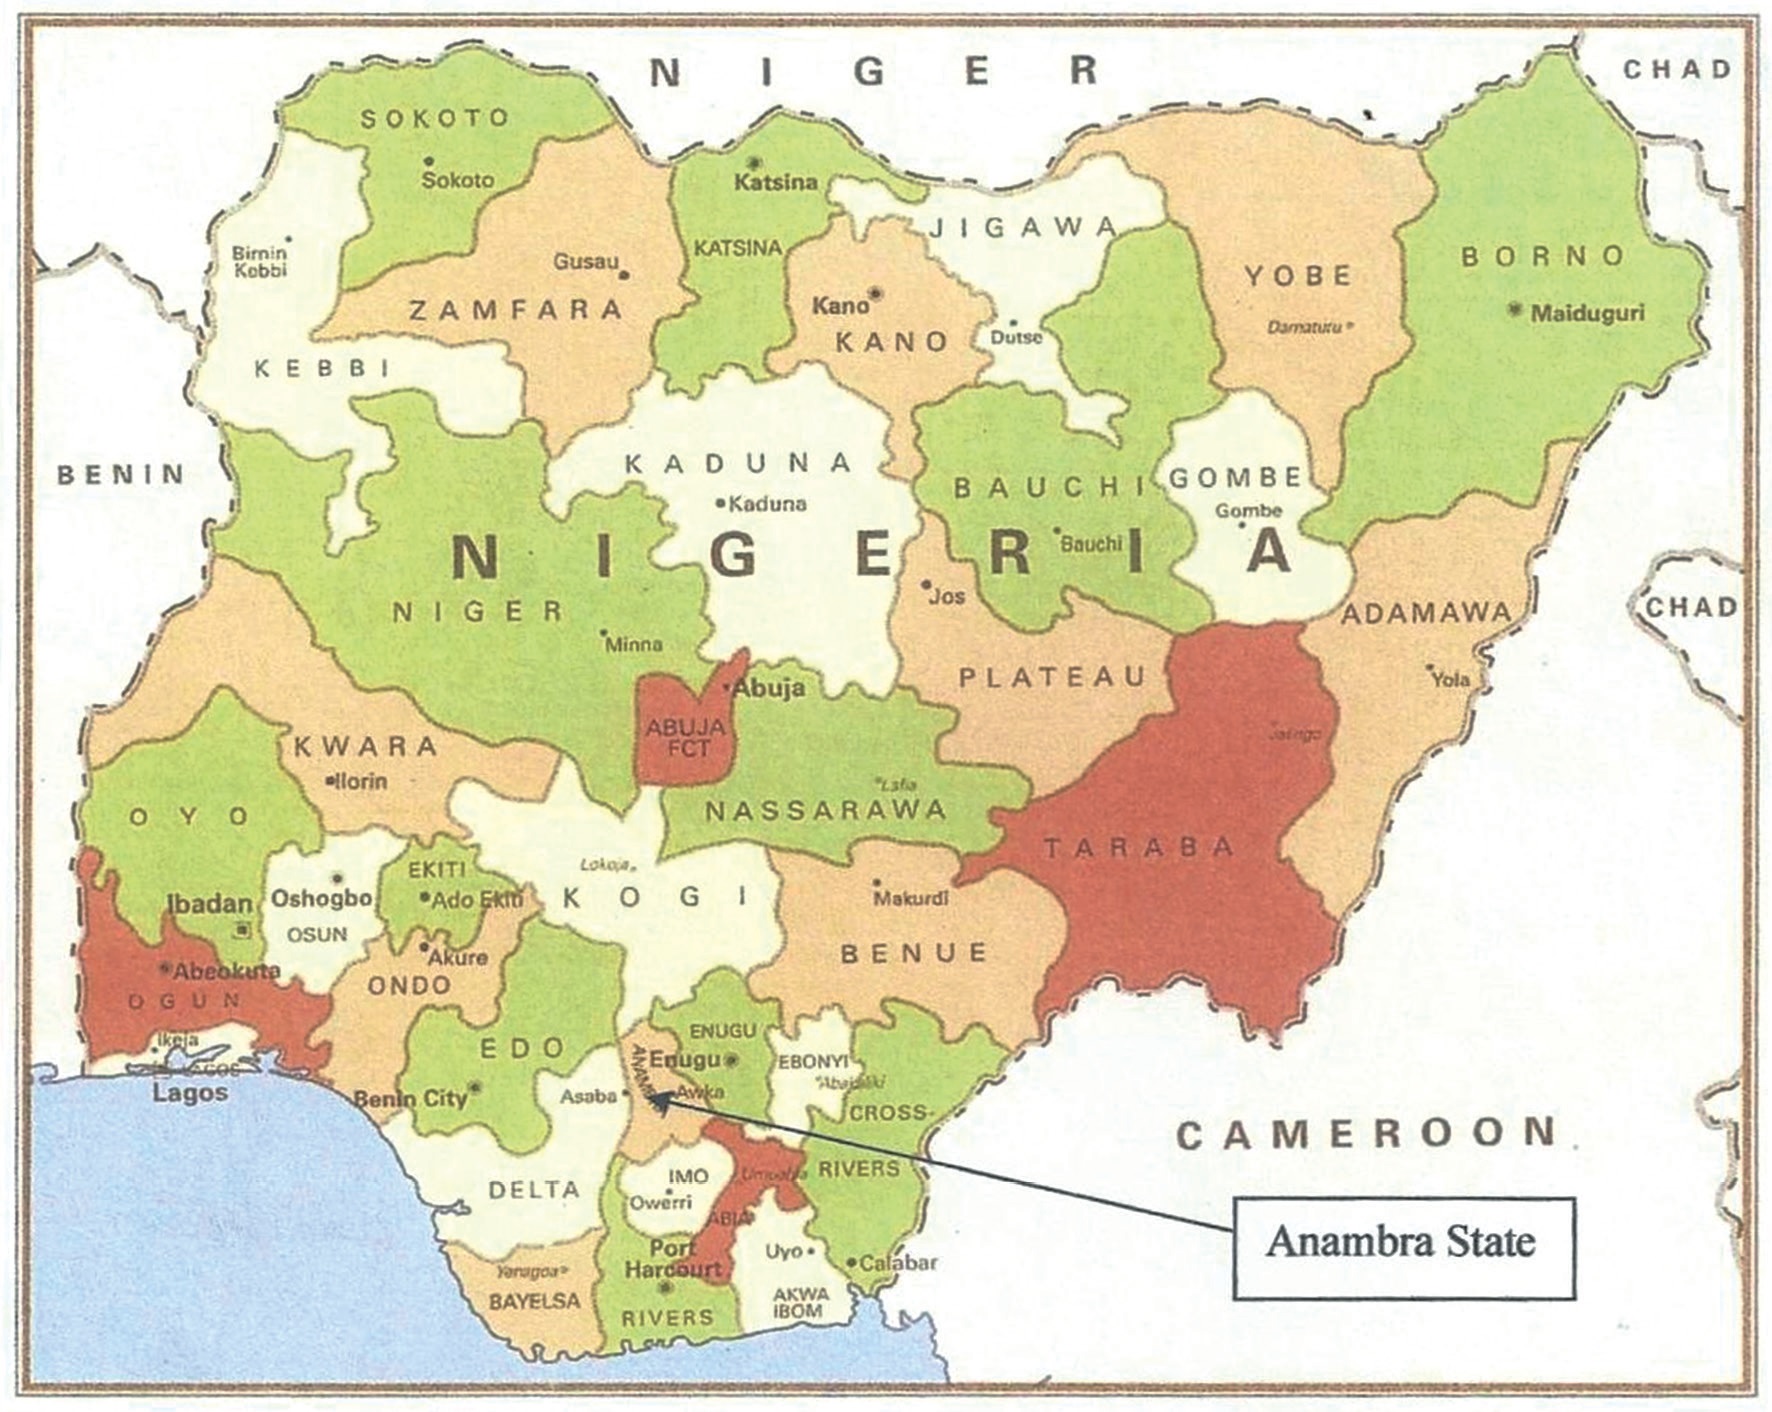 Map of Nigeria with study area in Anambra State indicated.